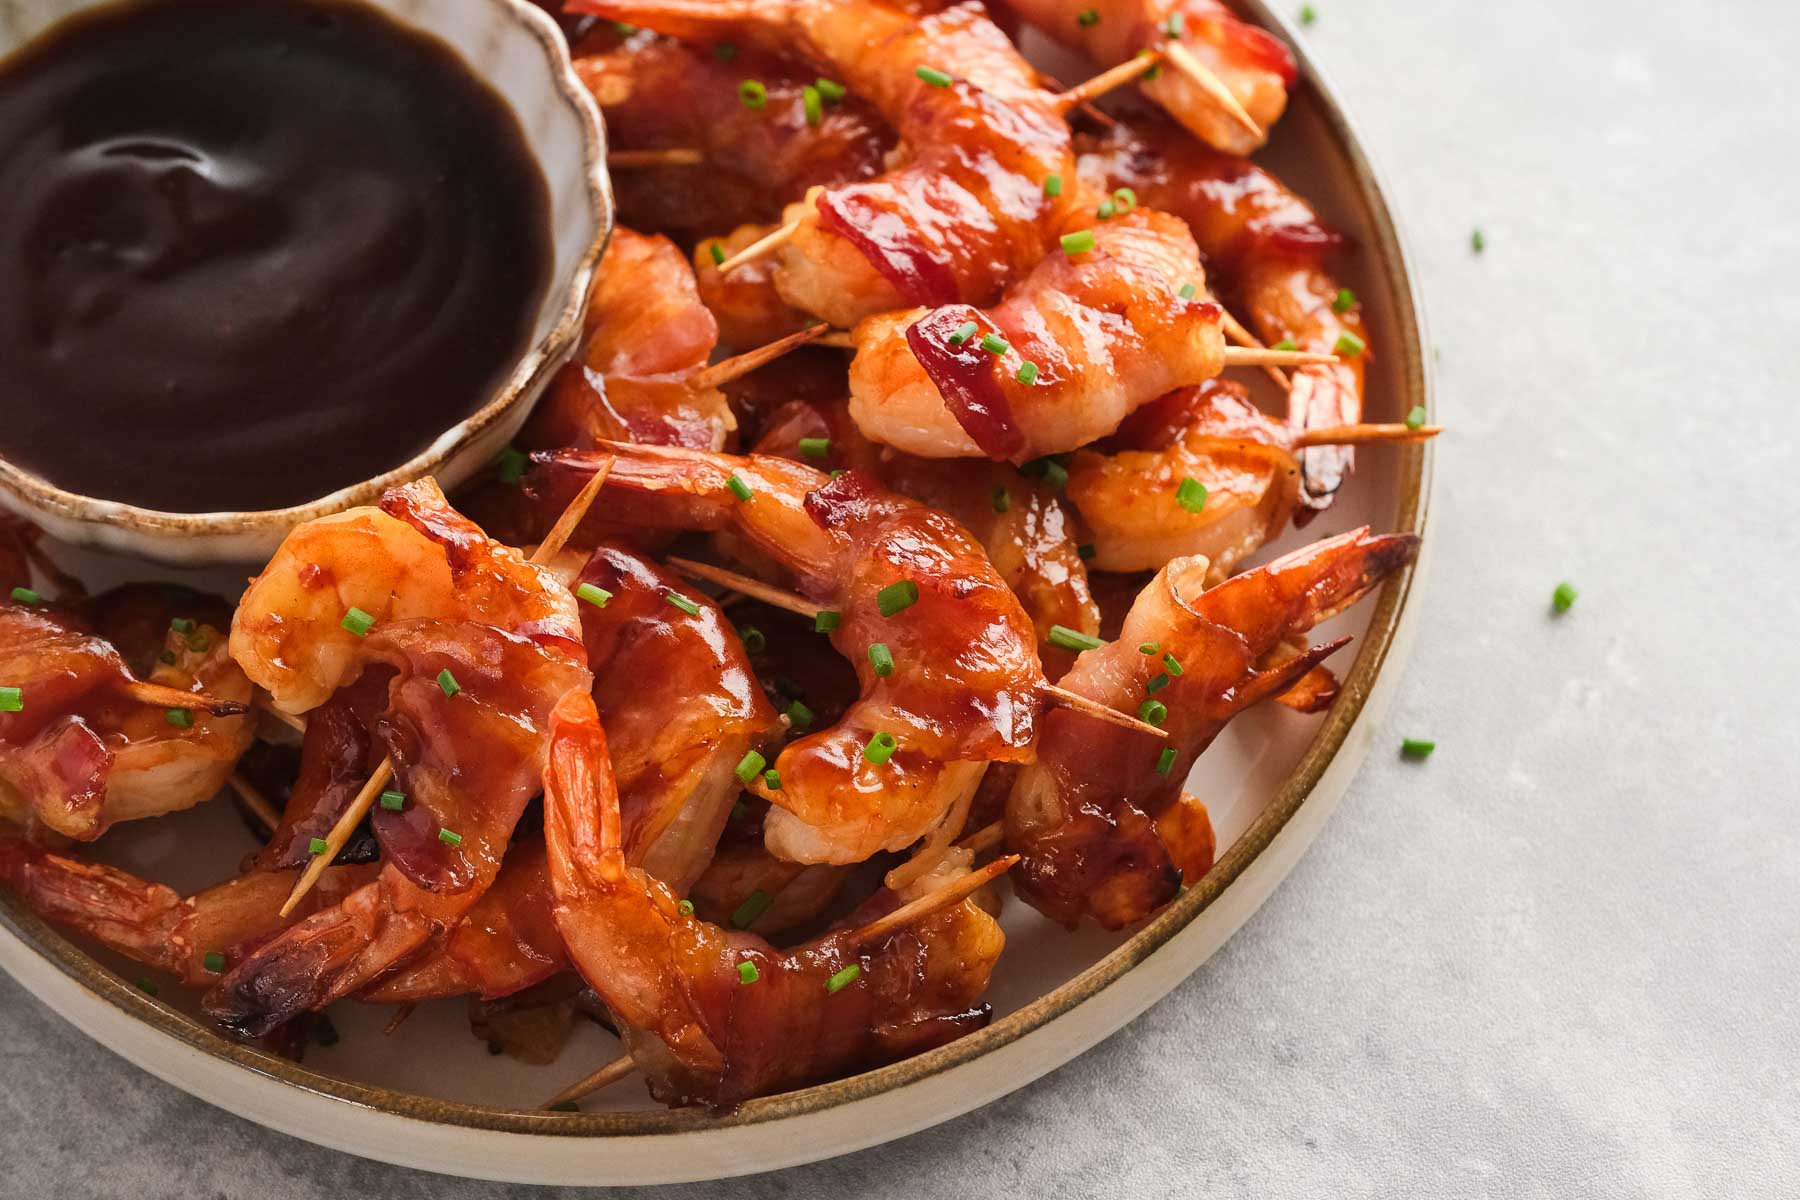 bacon wrapped shrimp on a plate with a small bowl of bbq sauce for dipping